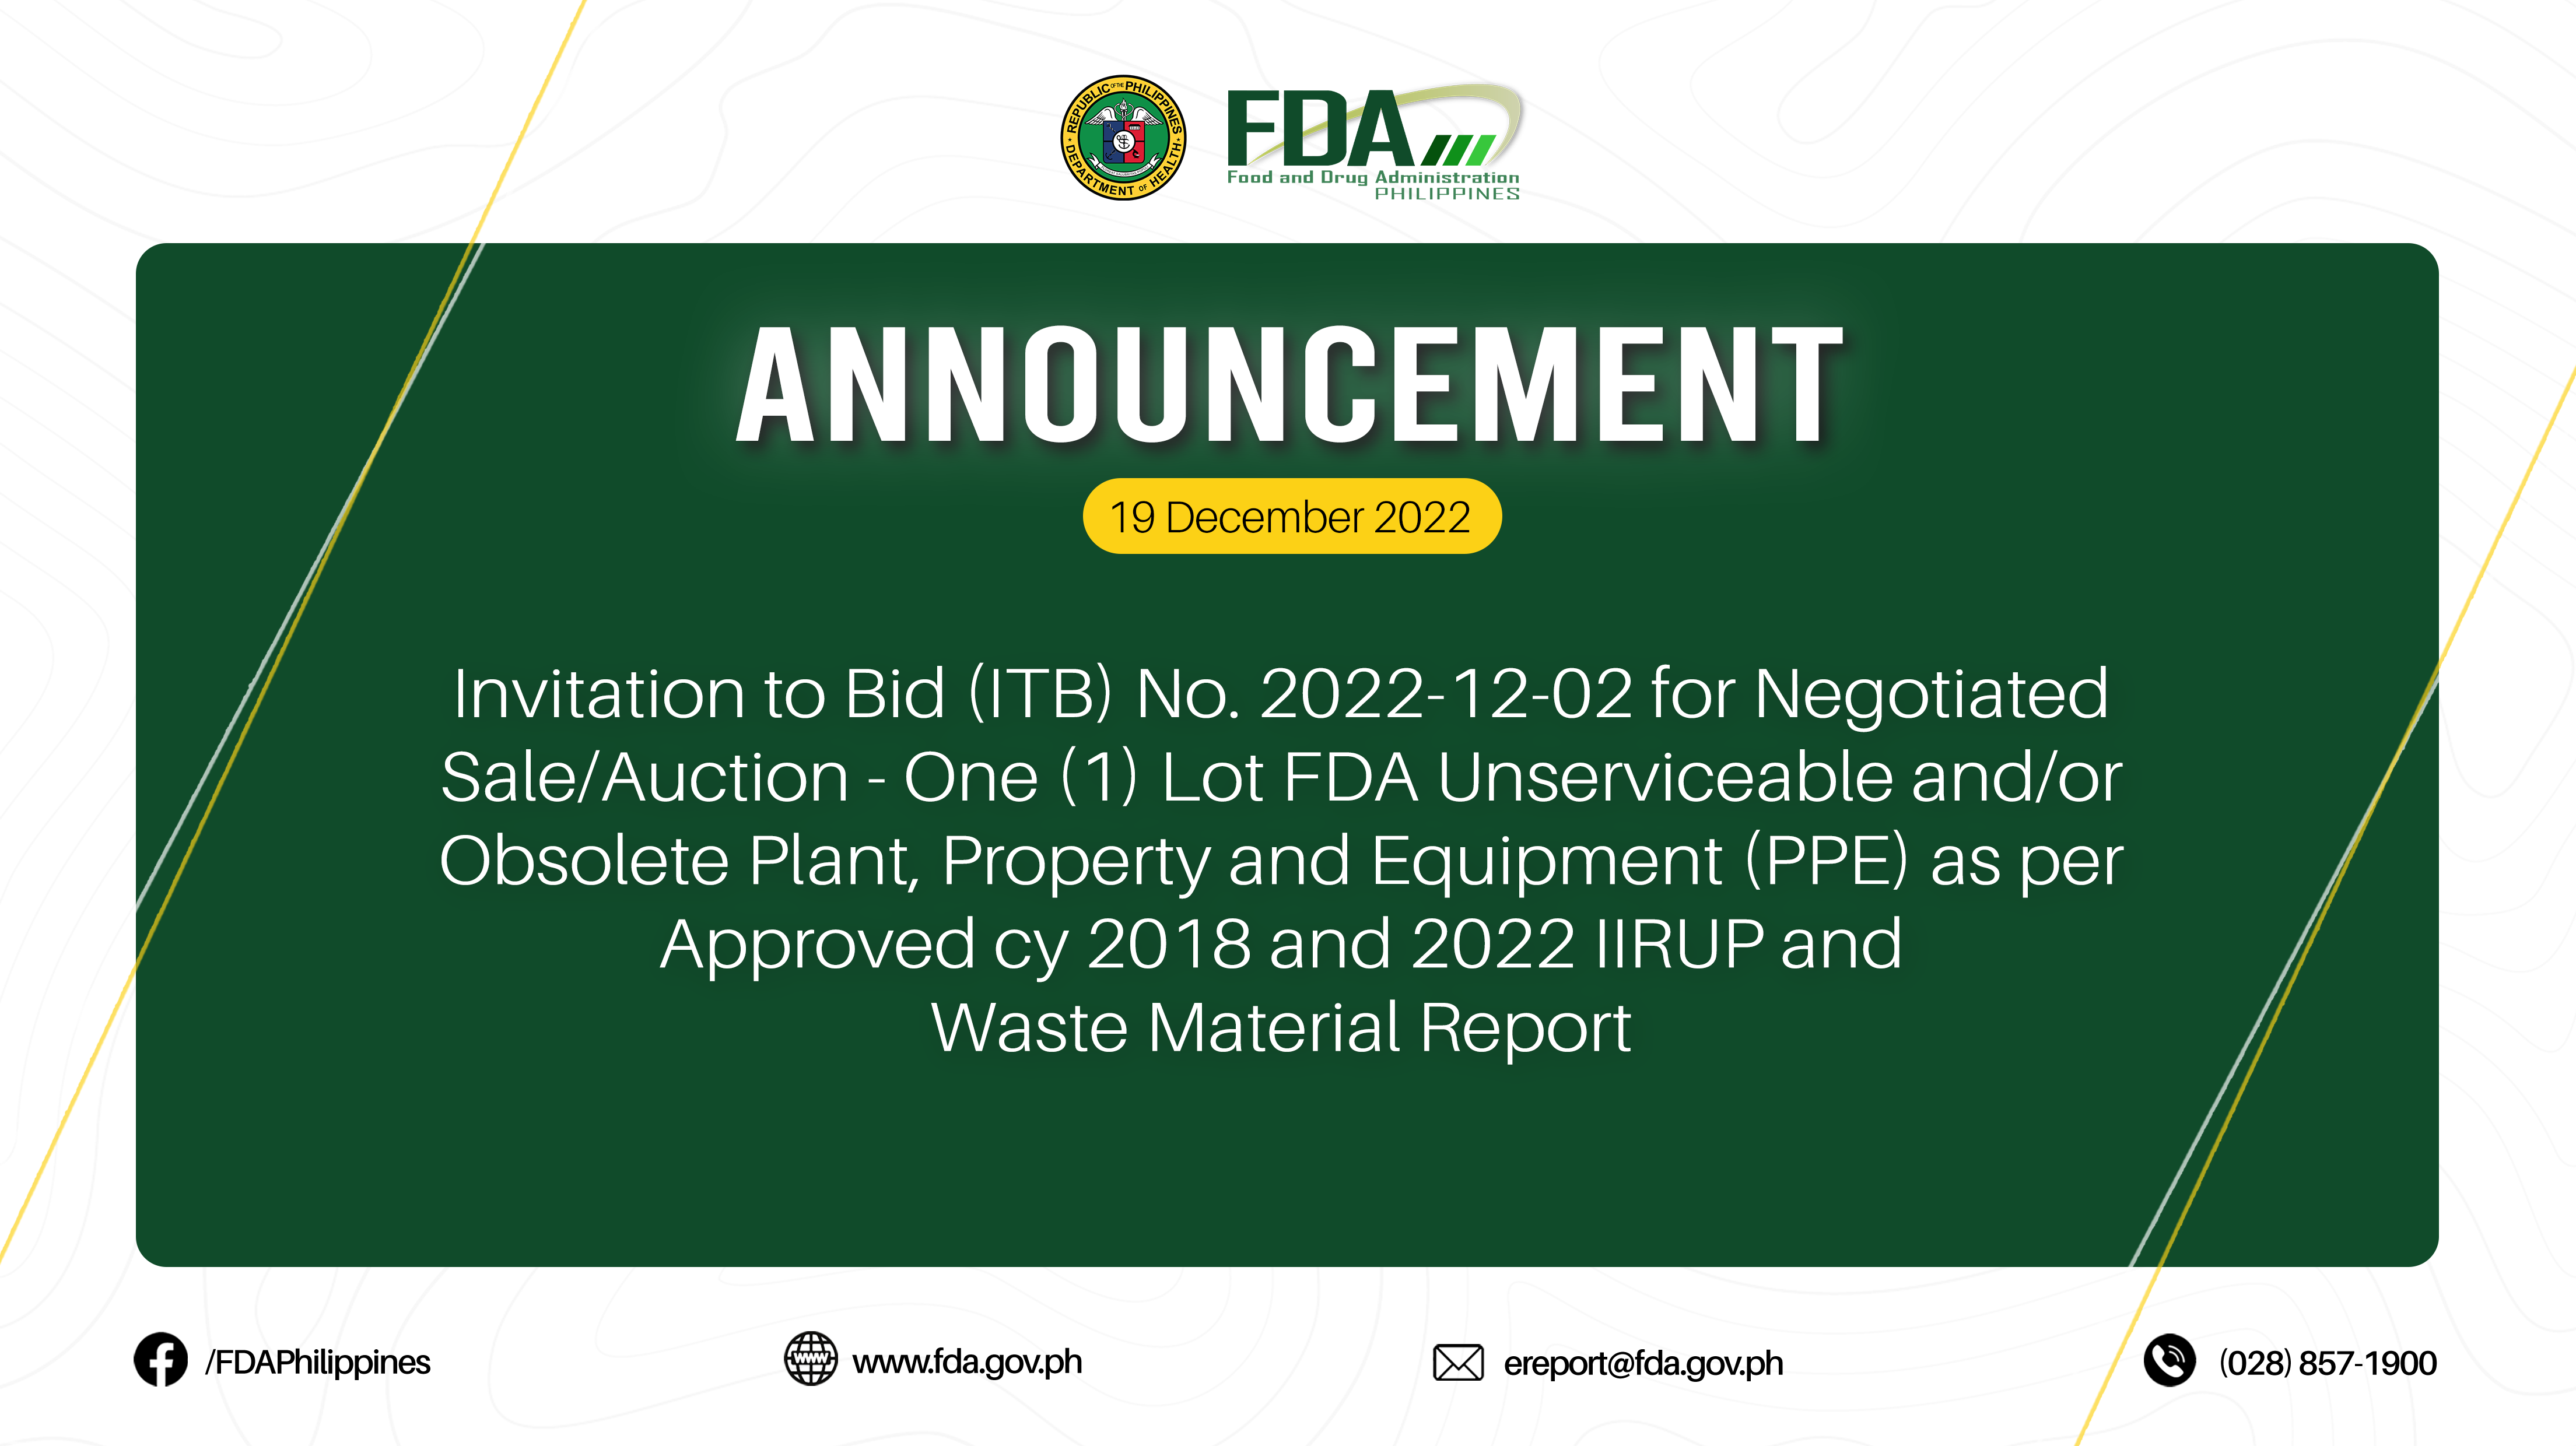 Announcement || Invitation to Bid (ITB) No. 2022-12-02 for Negotiated Sale/Auction – One (1) Lot FDA Unserviceable and/or Obsolete Plant, Property and Equipment (PPE) as per Approved cy 2018 and 2022 IIRUP and Waste Material Report